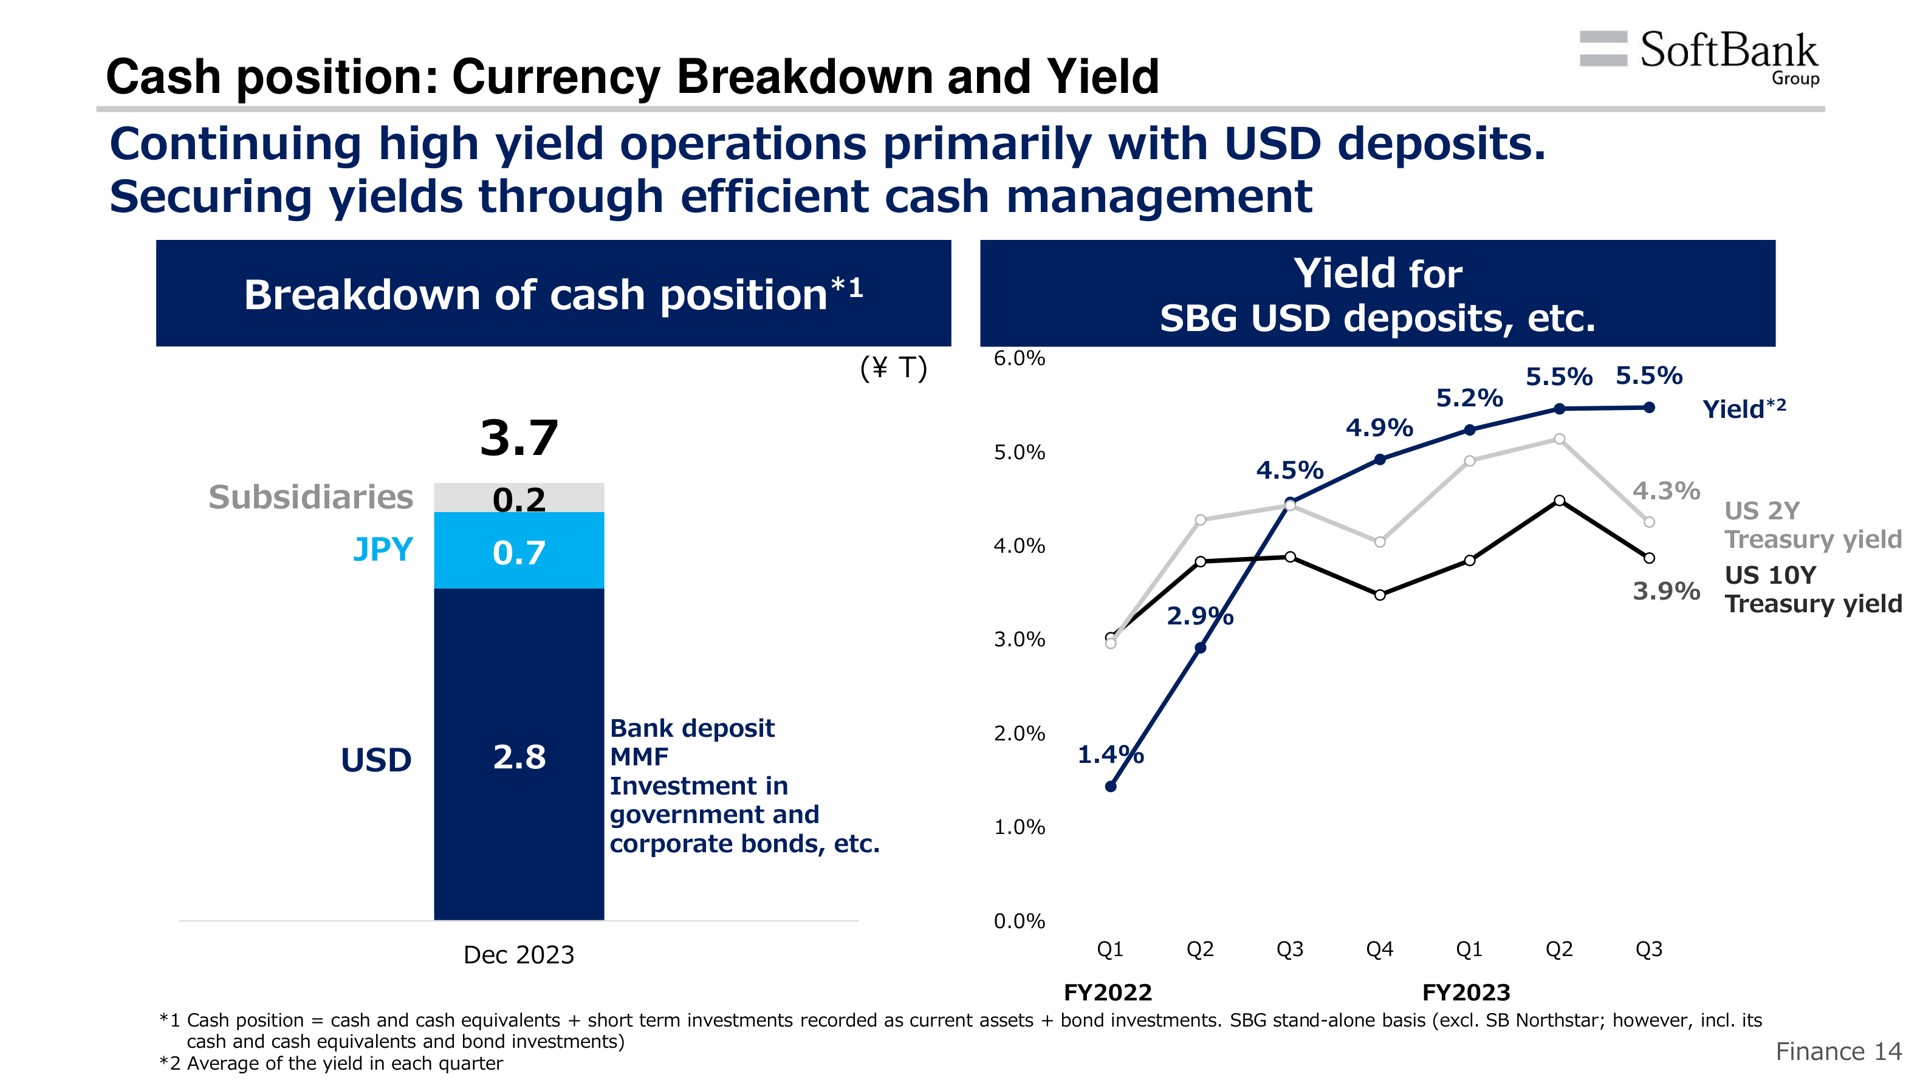 cash position currency breakdown and yield continuing high yield operations primarily with deposits securing yields through efficient cash management | SoftBank